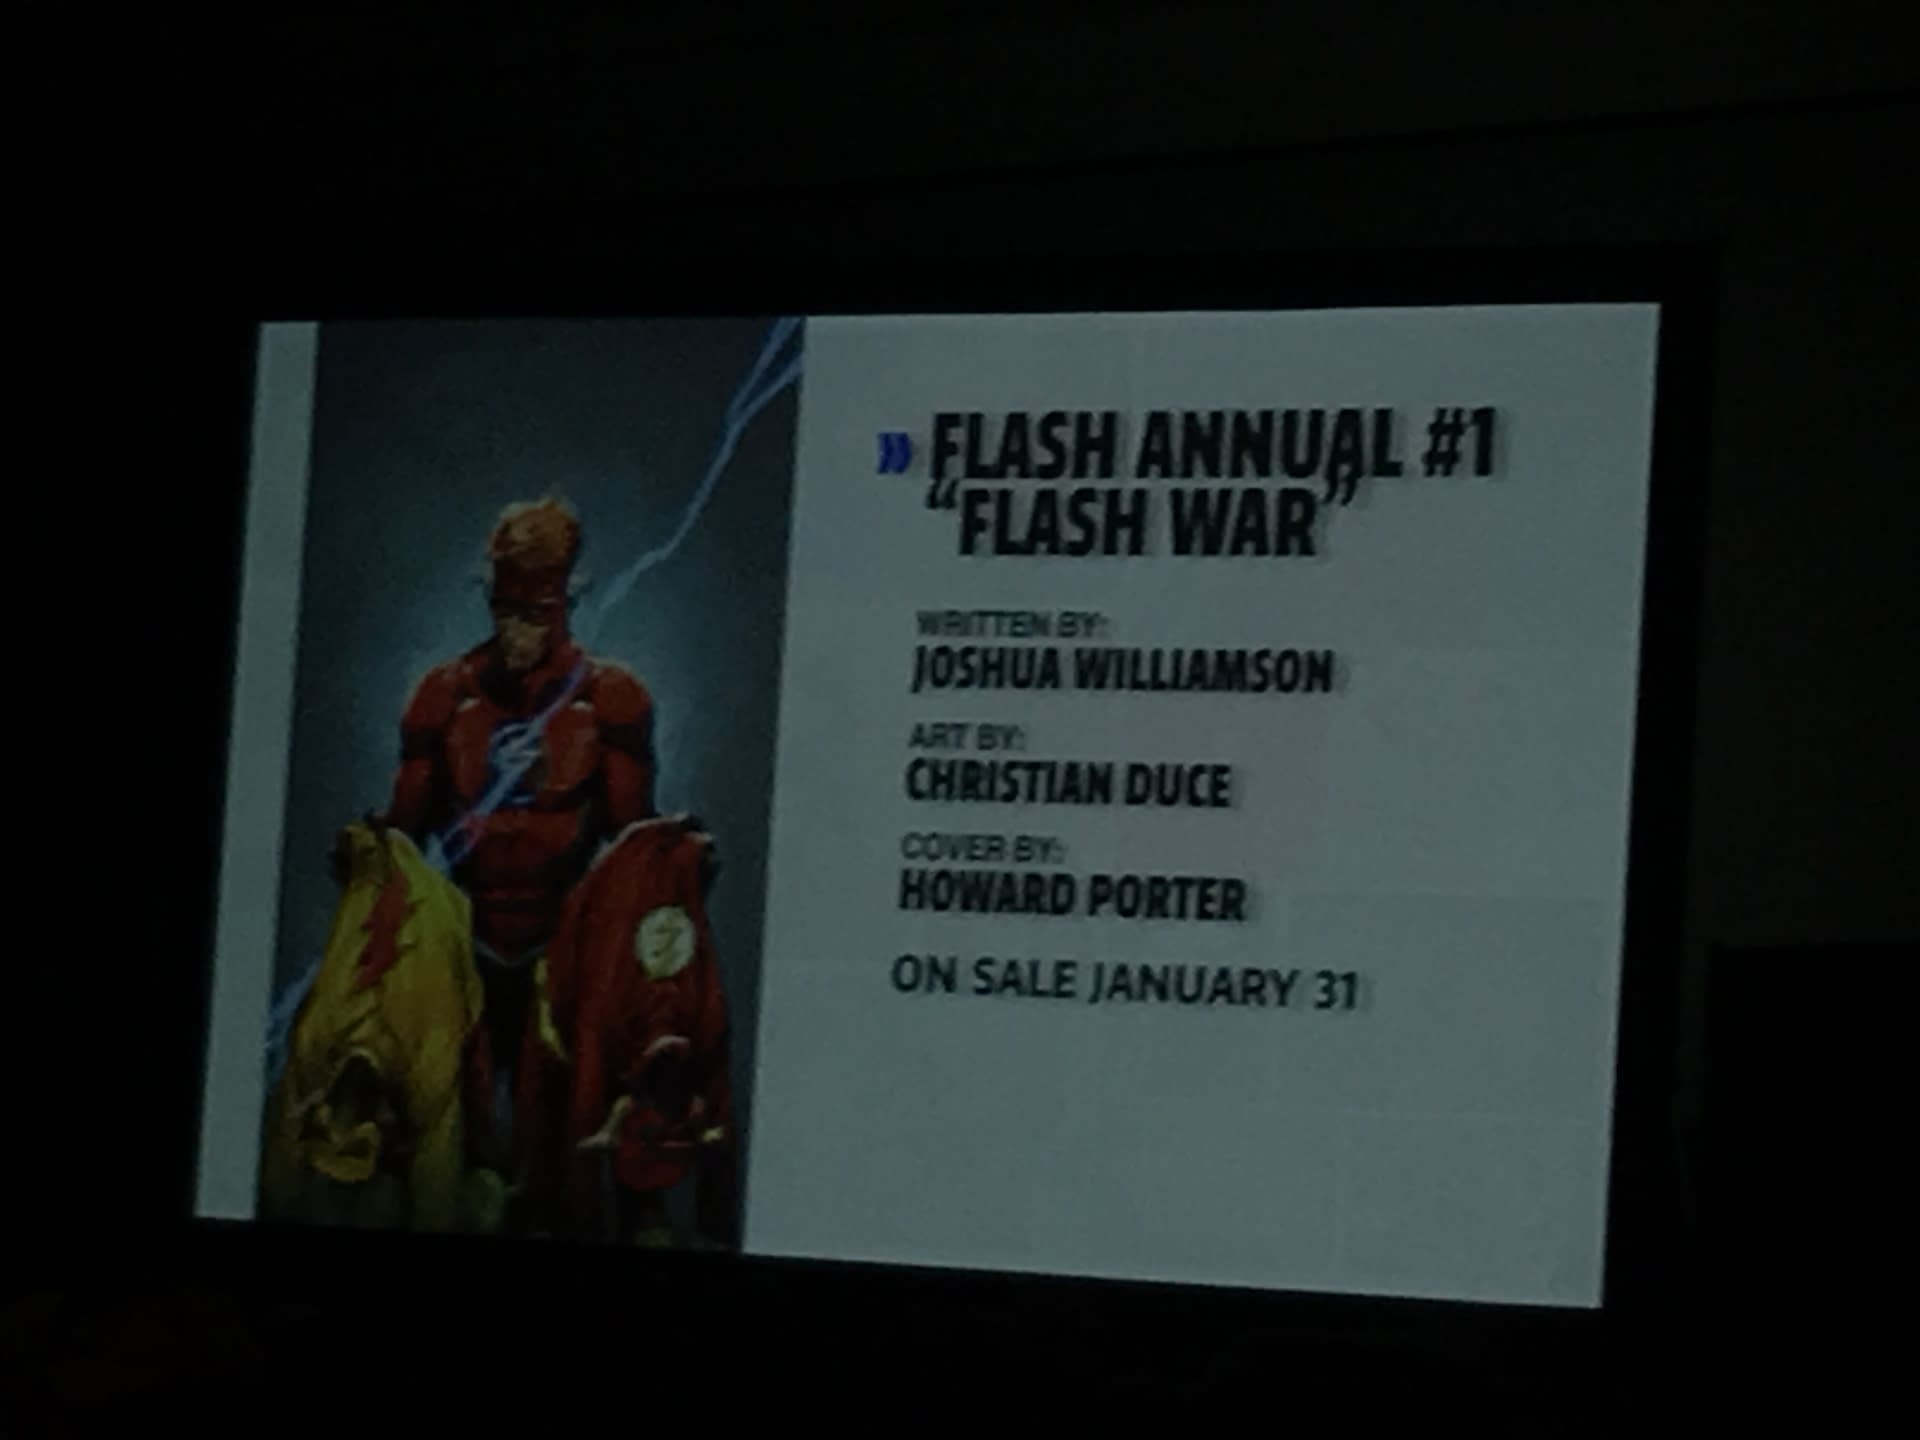 Barry Vs. Wally? The Flash War Begins In January With Flash Annual #1